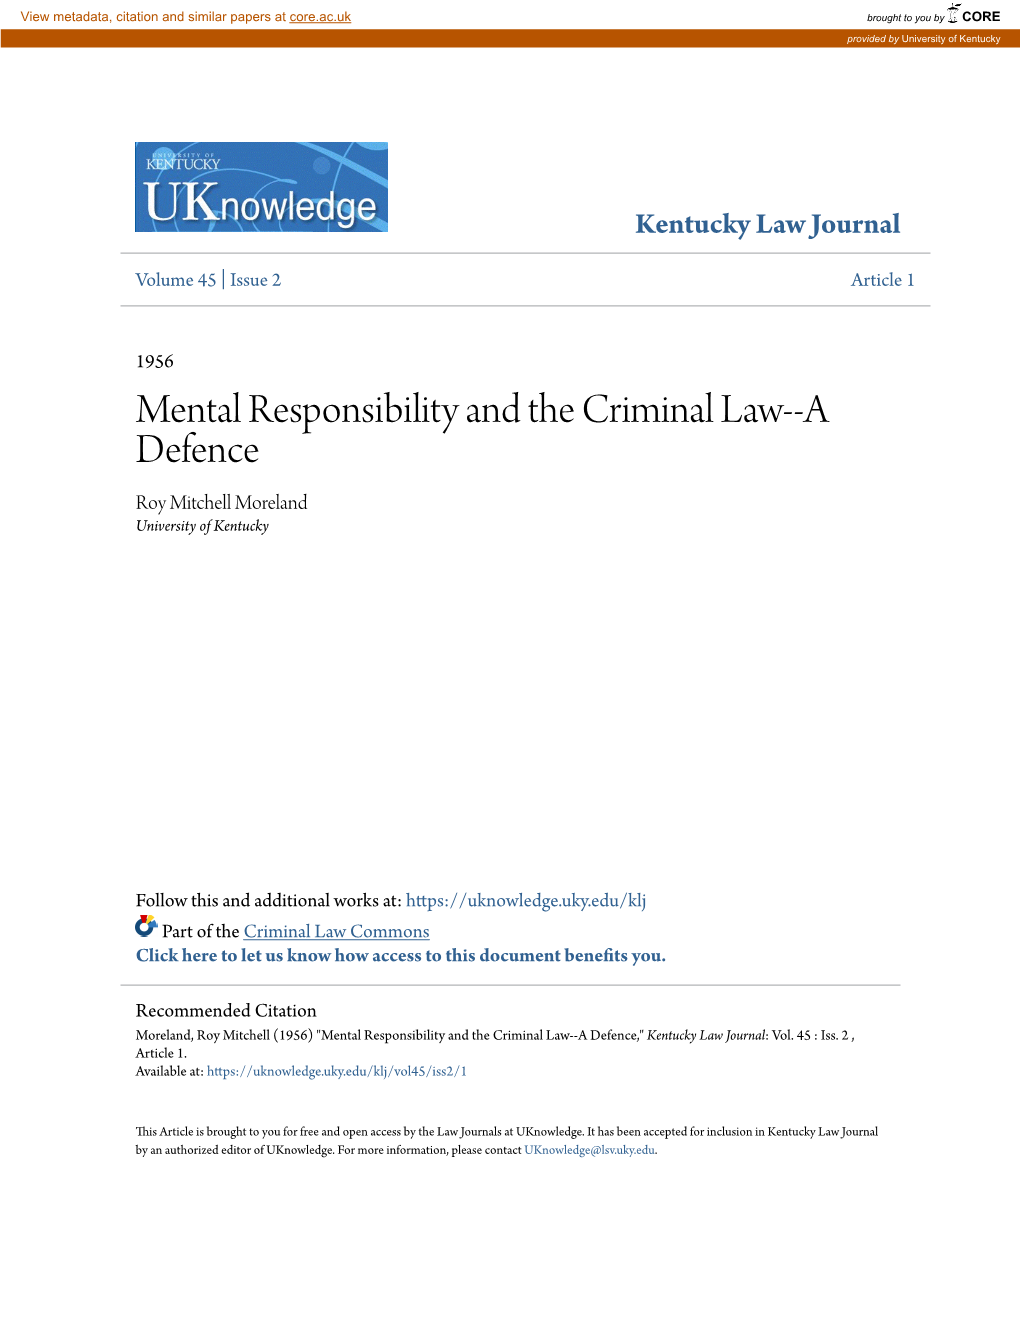 Mental Responsibility and the Criminal Law--A Defence Roy Mitchell Moreland University of Kentucky